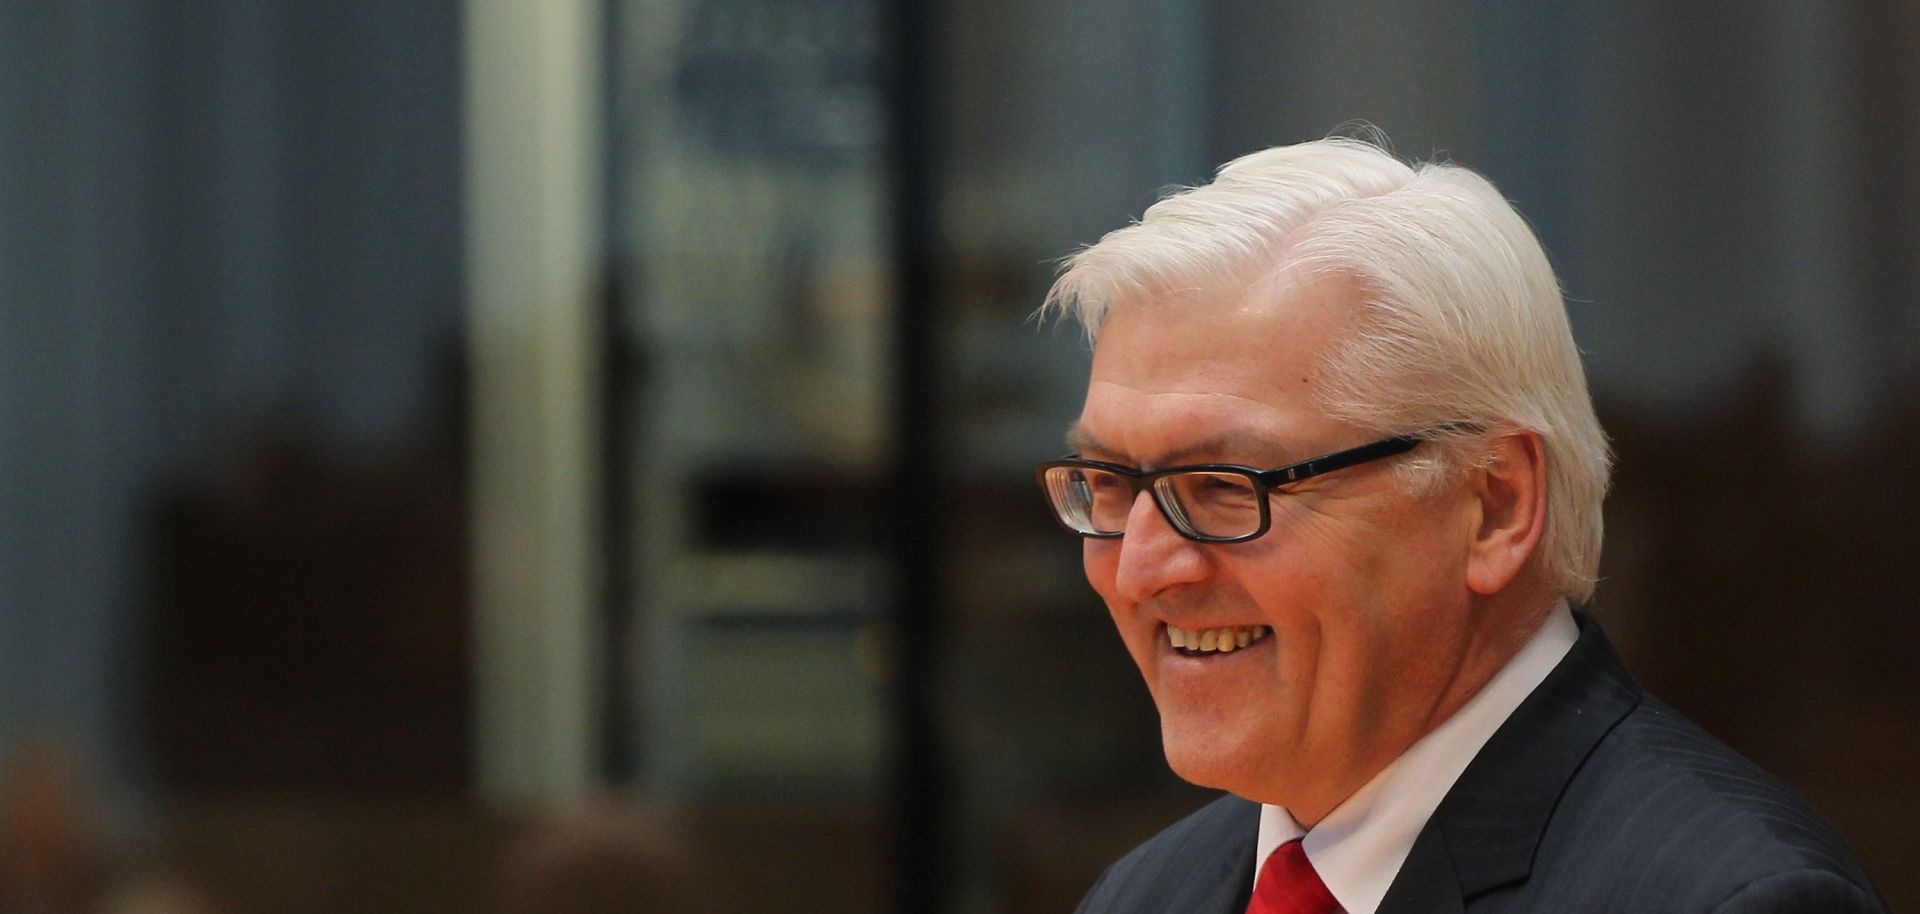  German Foreign Minister Frank-Walter Steinmeier arrives to testify at the Bundestag commission hearing.